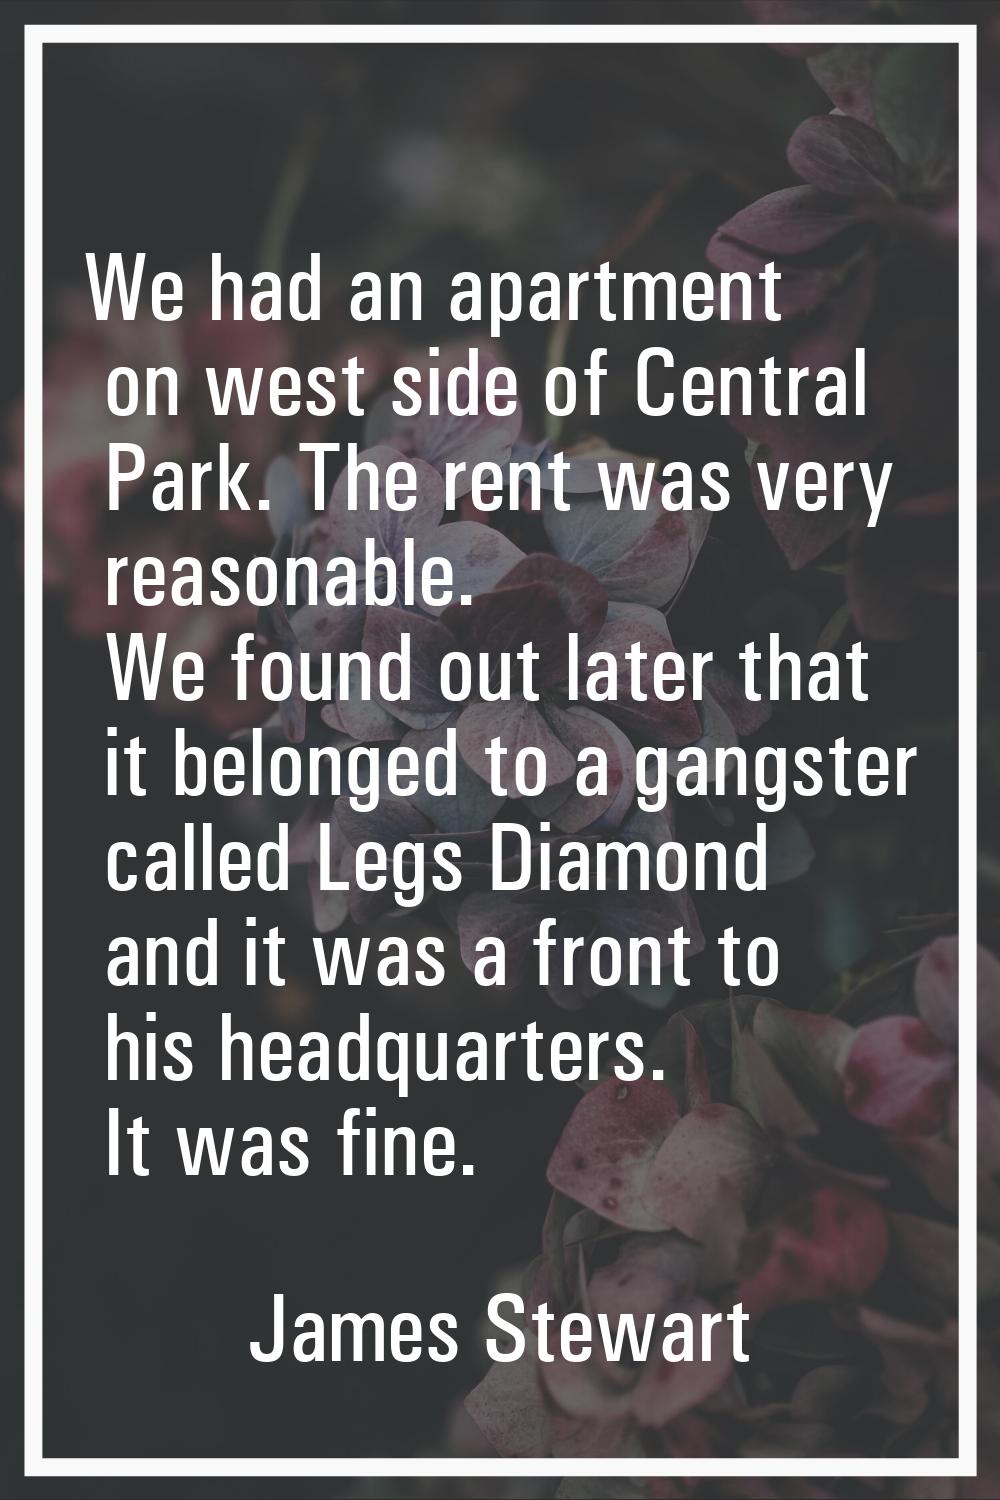 We had an apartment on west side of Central Park. The rent was very reasonable. We found out later 